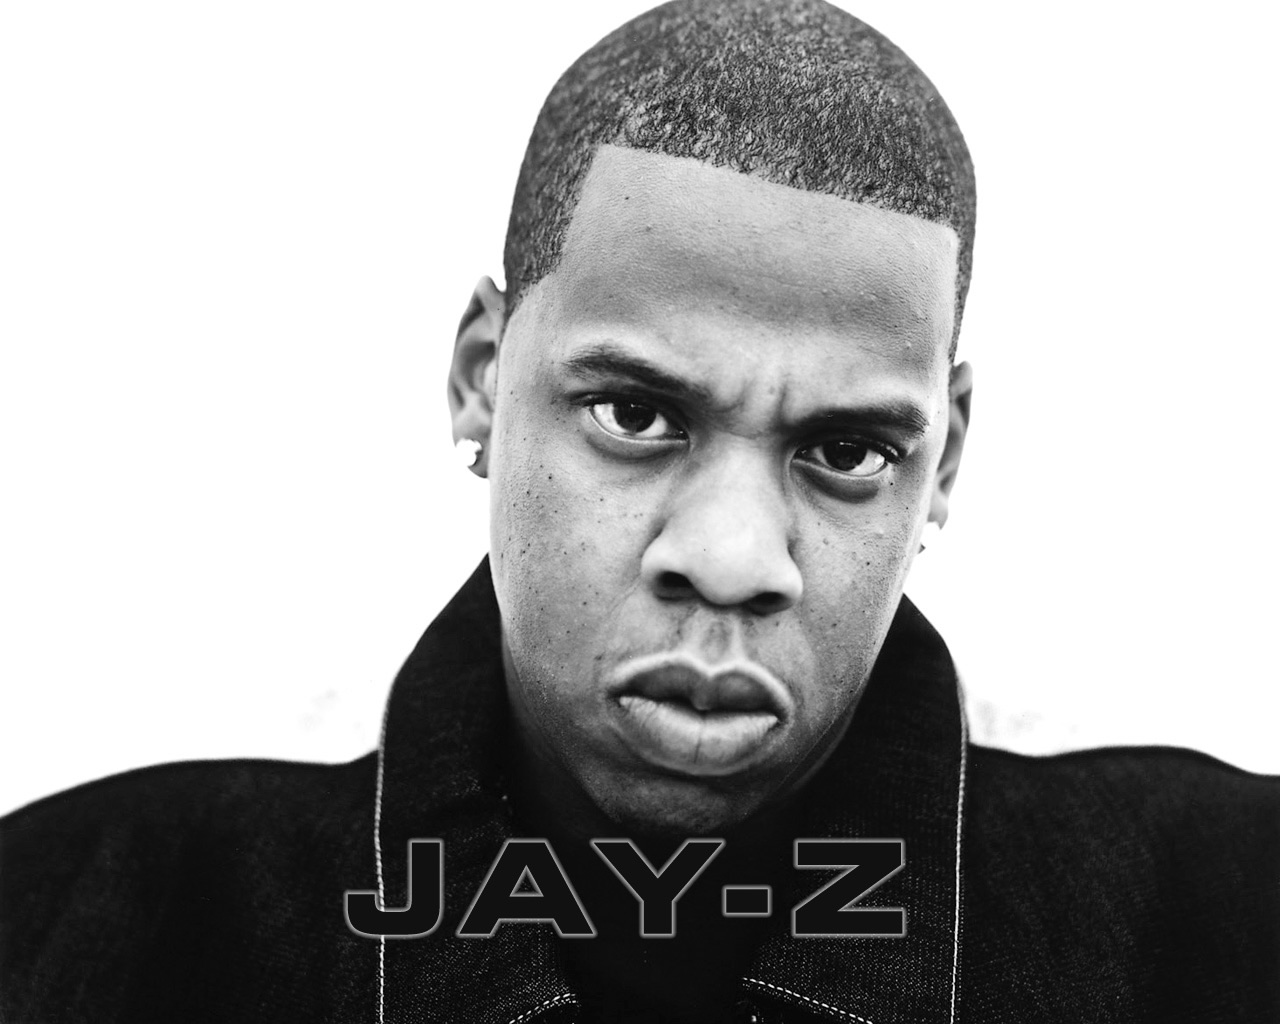 jay-z(Shawn Carter)说唱,HipHop歌手